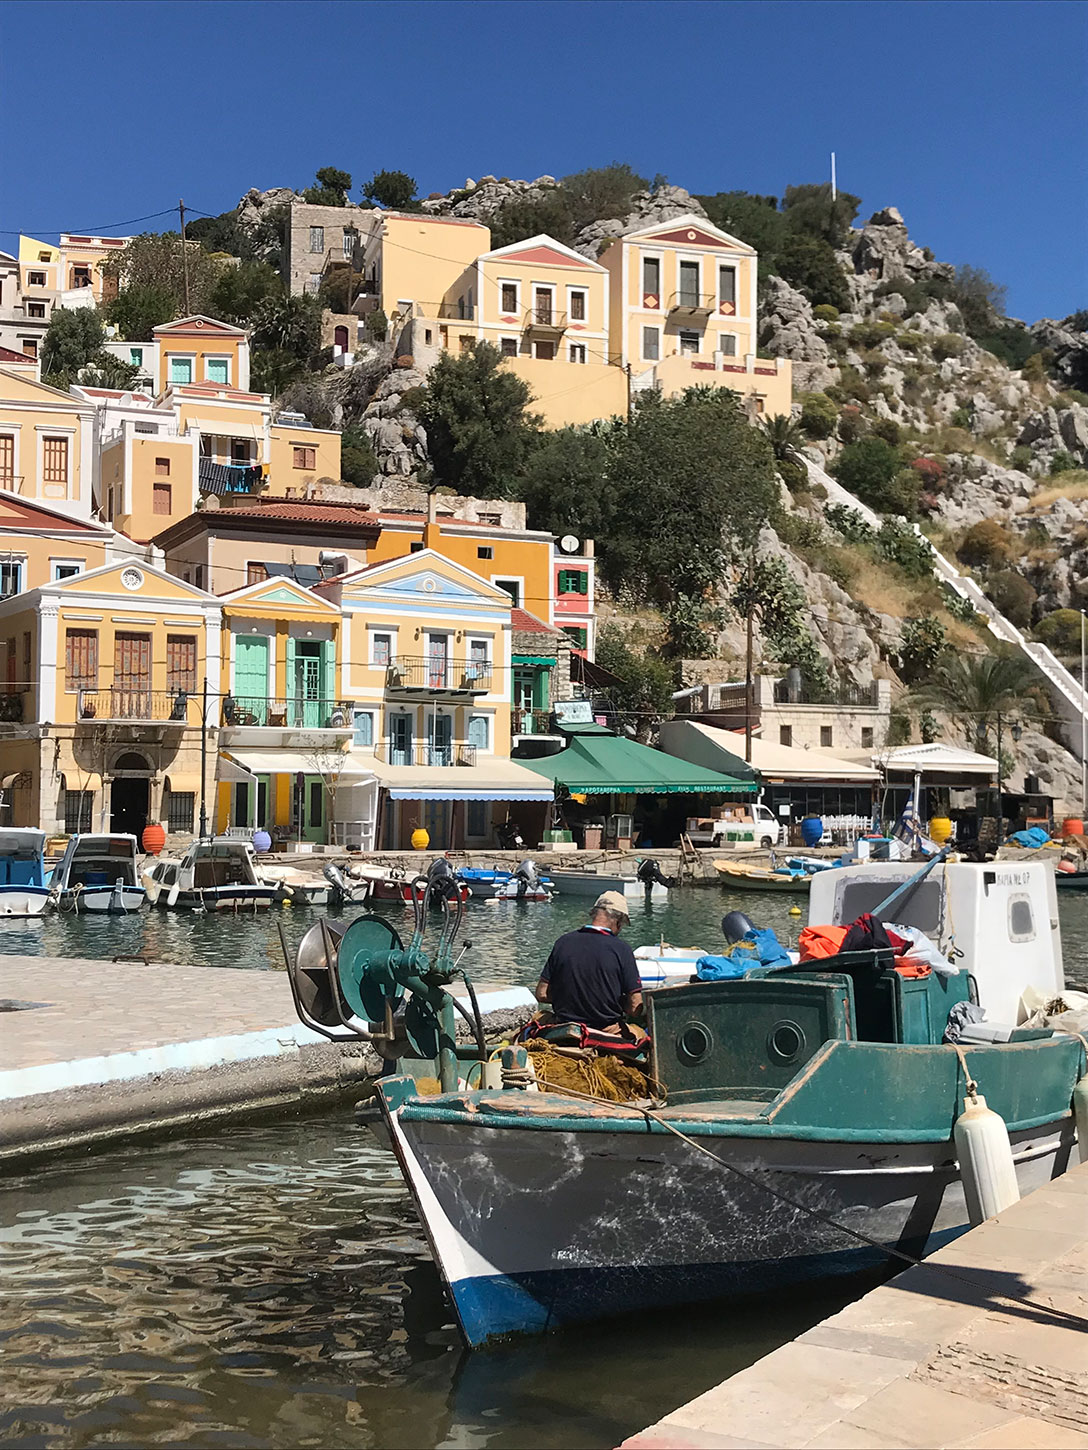 Symi fishing boat, monument in the background.